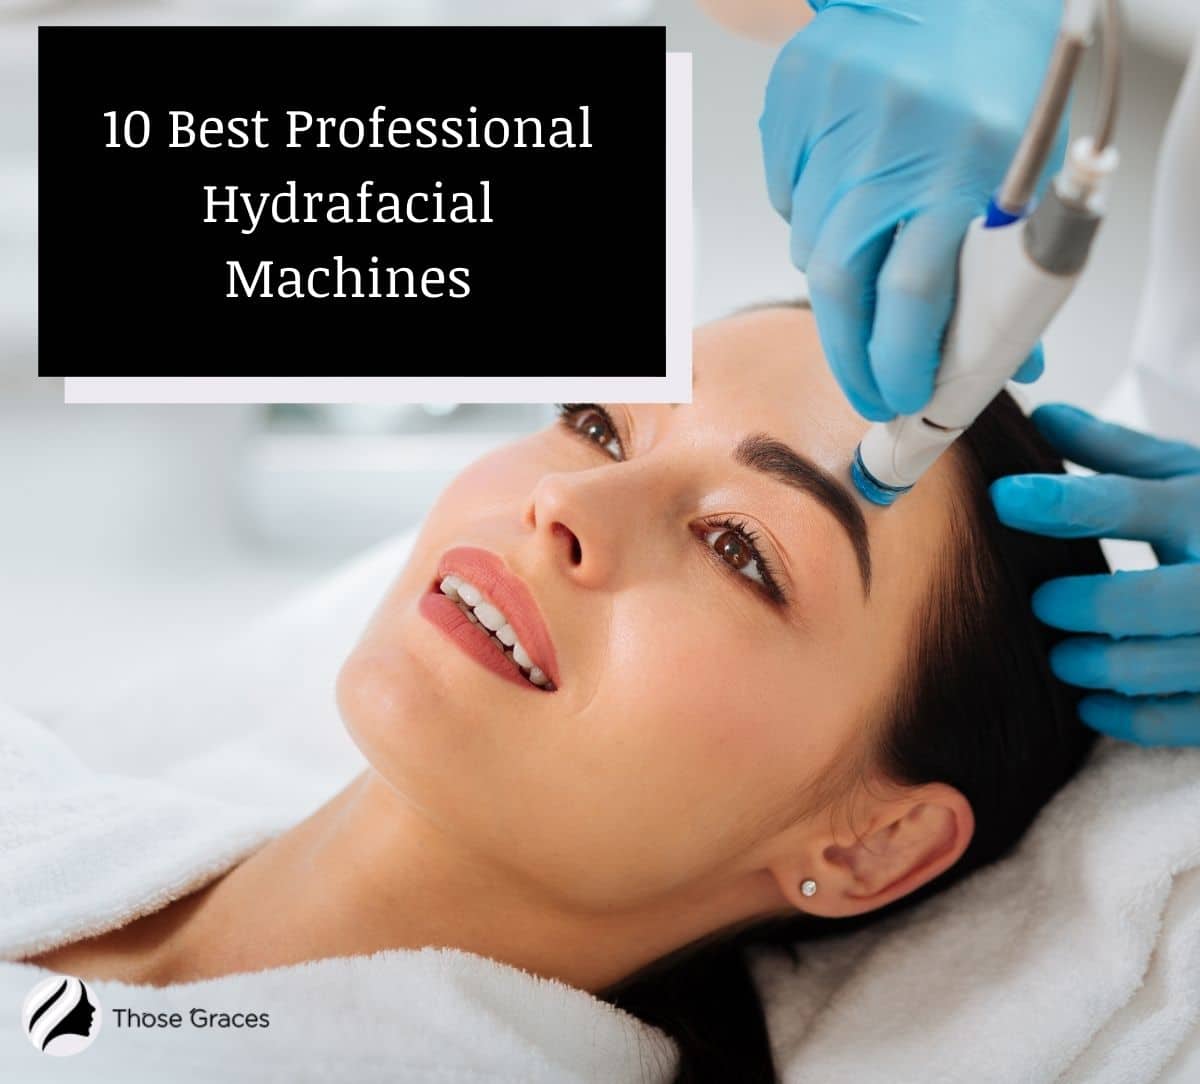 lady getting a treatment using the best professional hydrafacial machines